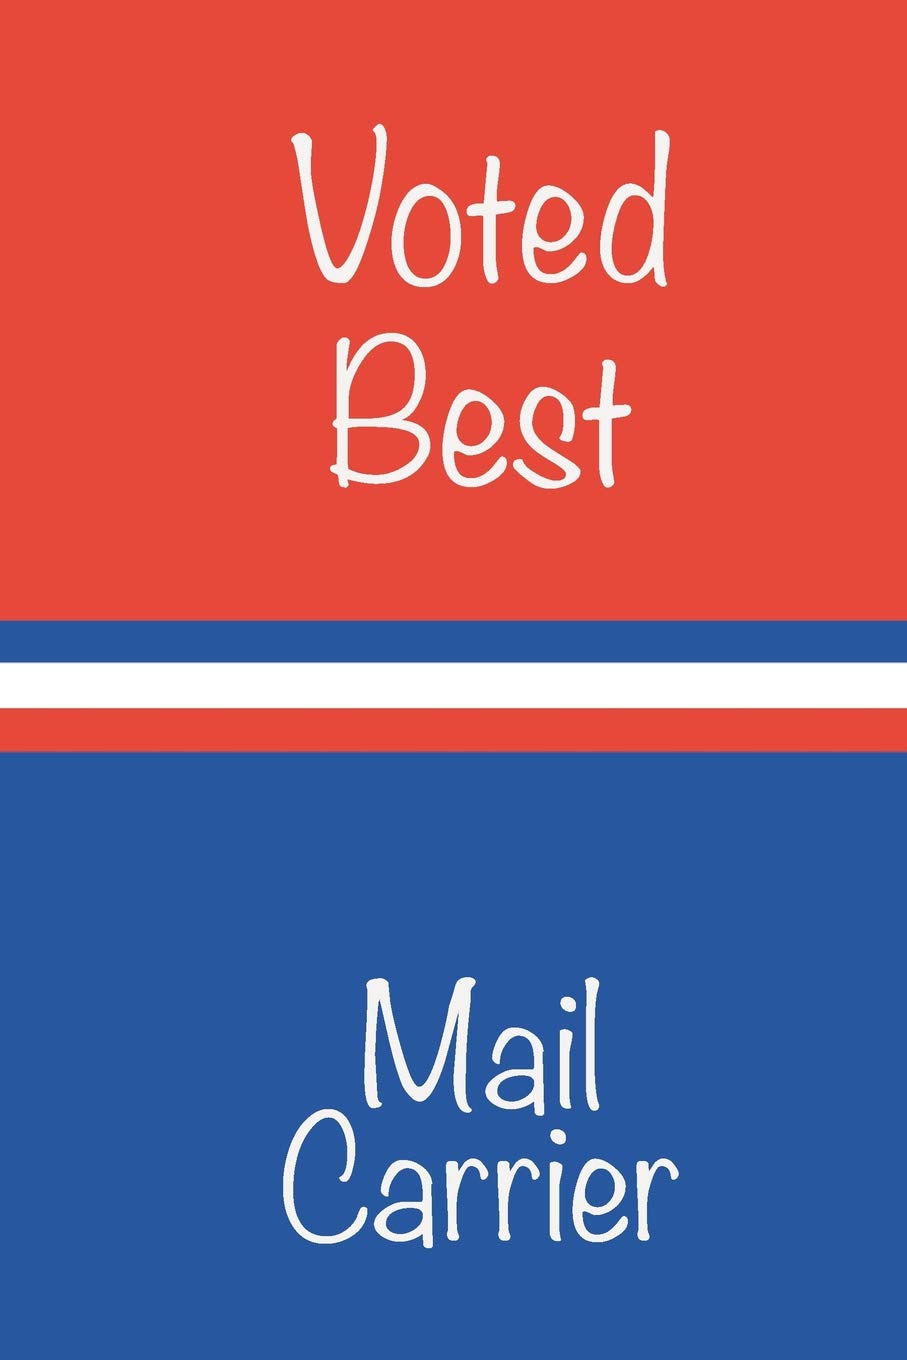 Voted Best Mail Carrier